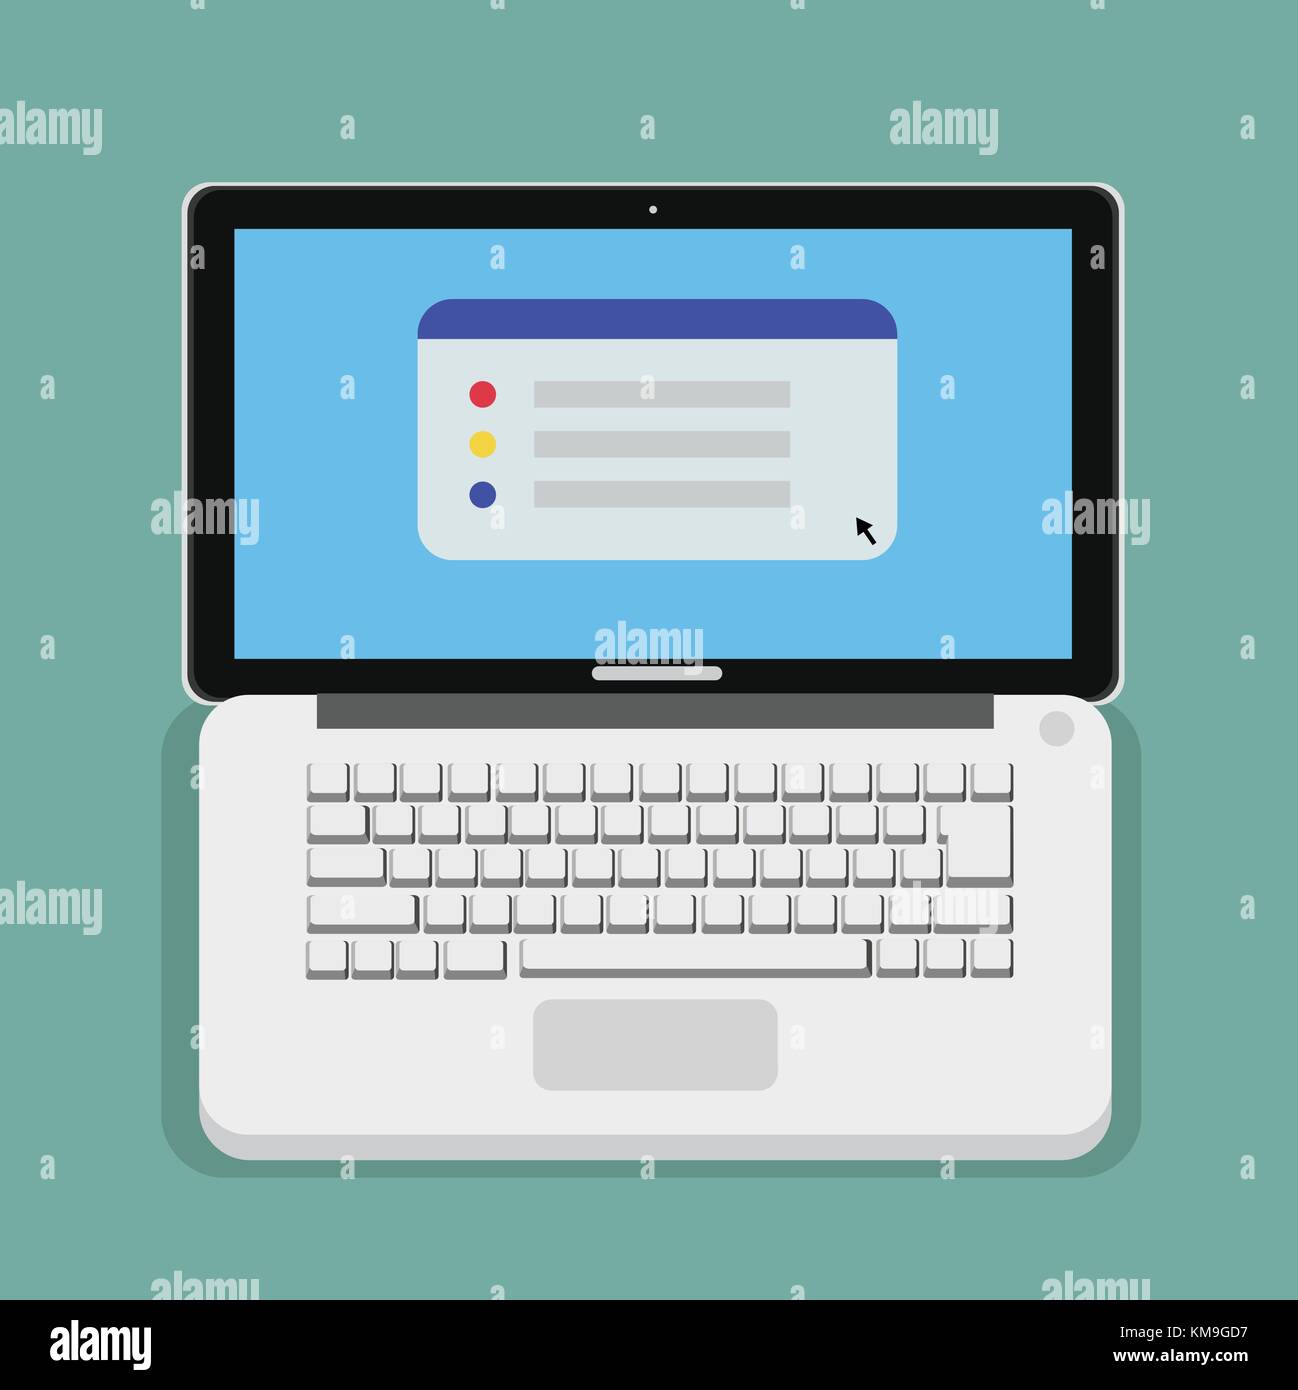 Flat computer laptop design with keyboard and simple website show on screen vector illustration. Stock Vector